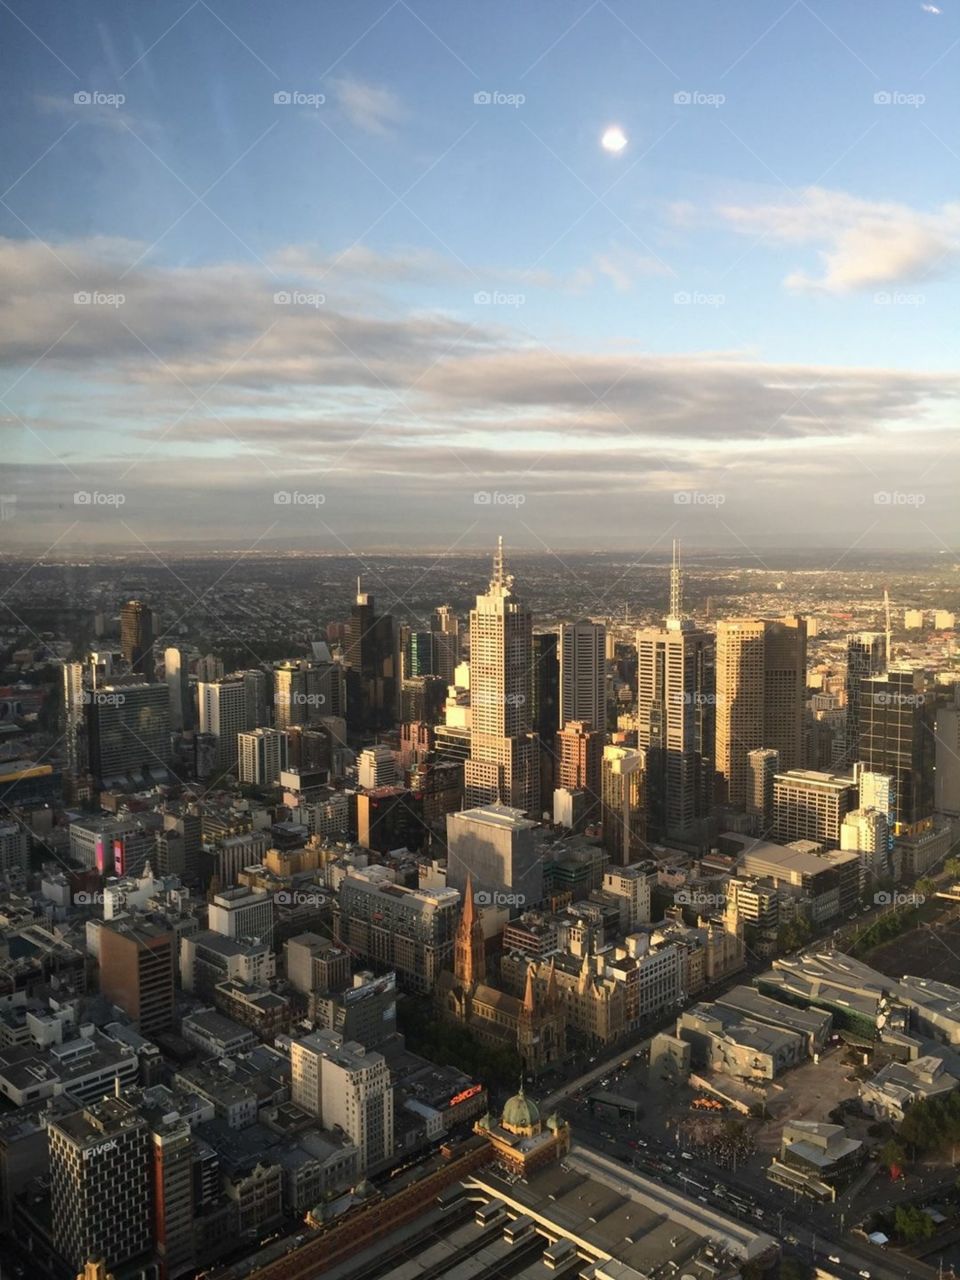 Melbourne from above 

